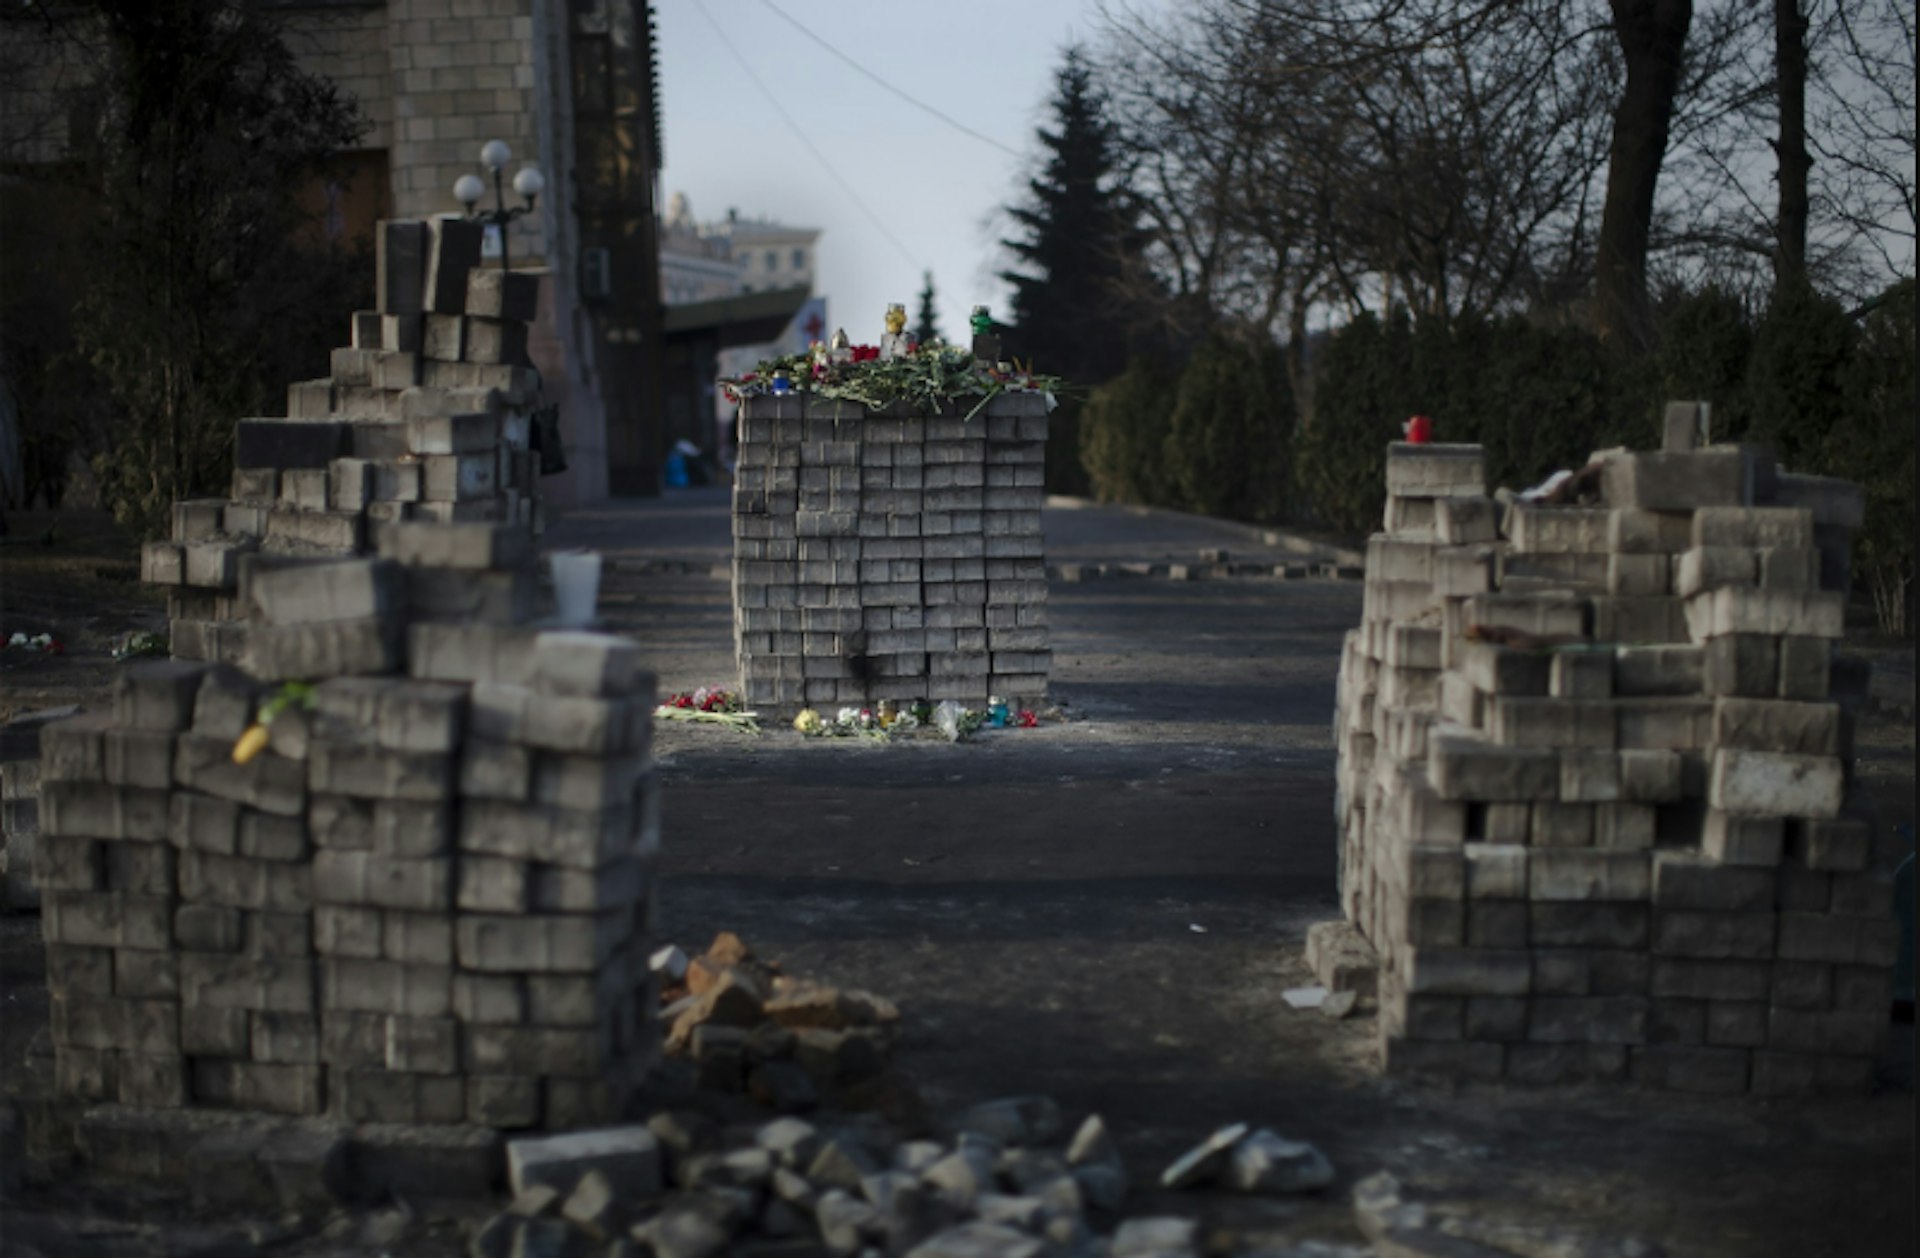 Piles of bricks to memorialise where protesters had been shot. Kiev, February 2014.